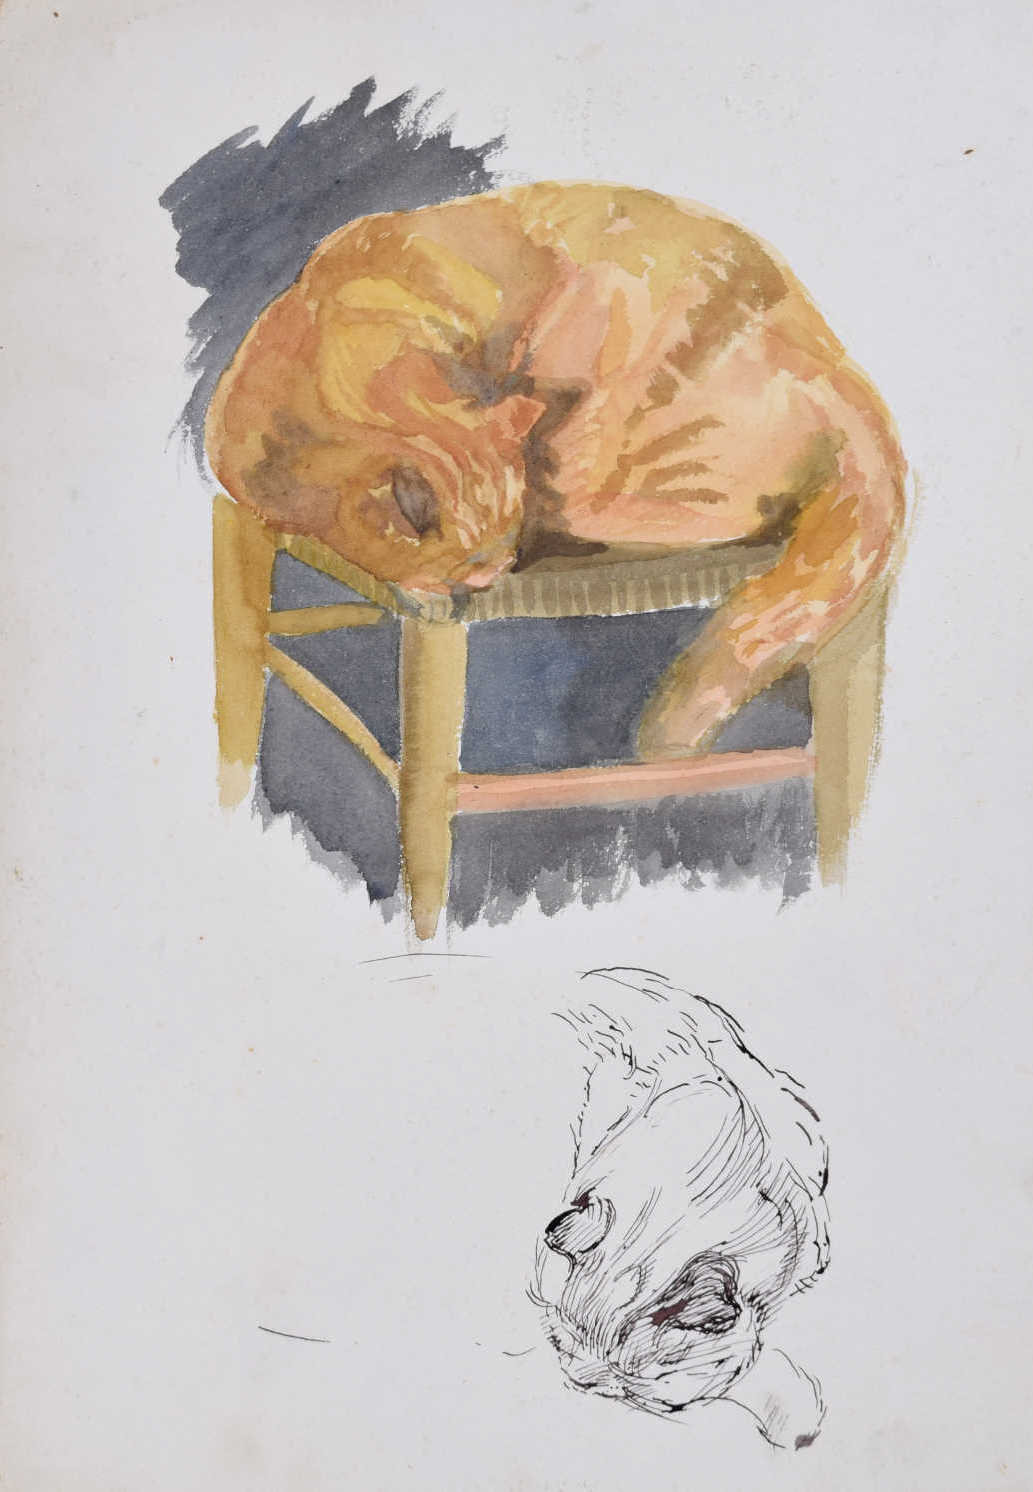 Hilary Hennes Miller, 'Cat Sleeping' (c.1940), Gouache, pen and ink on paper